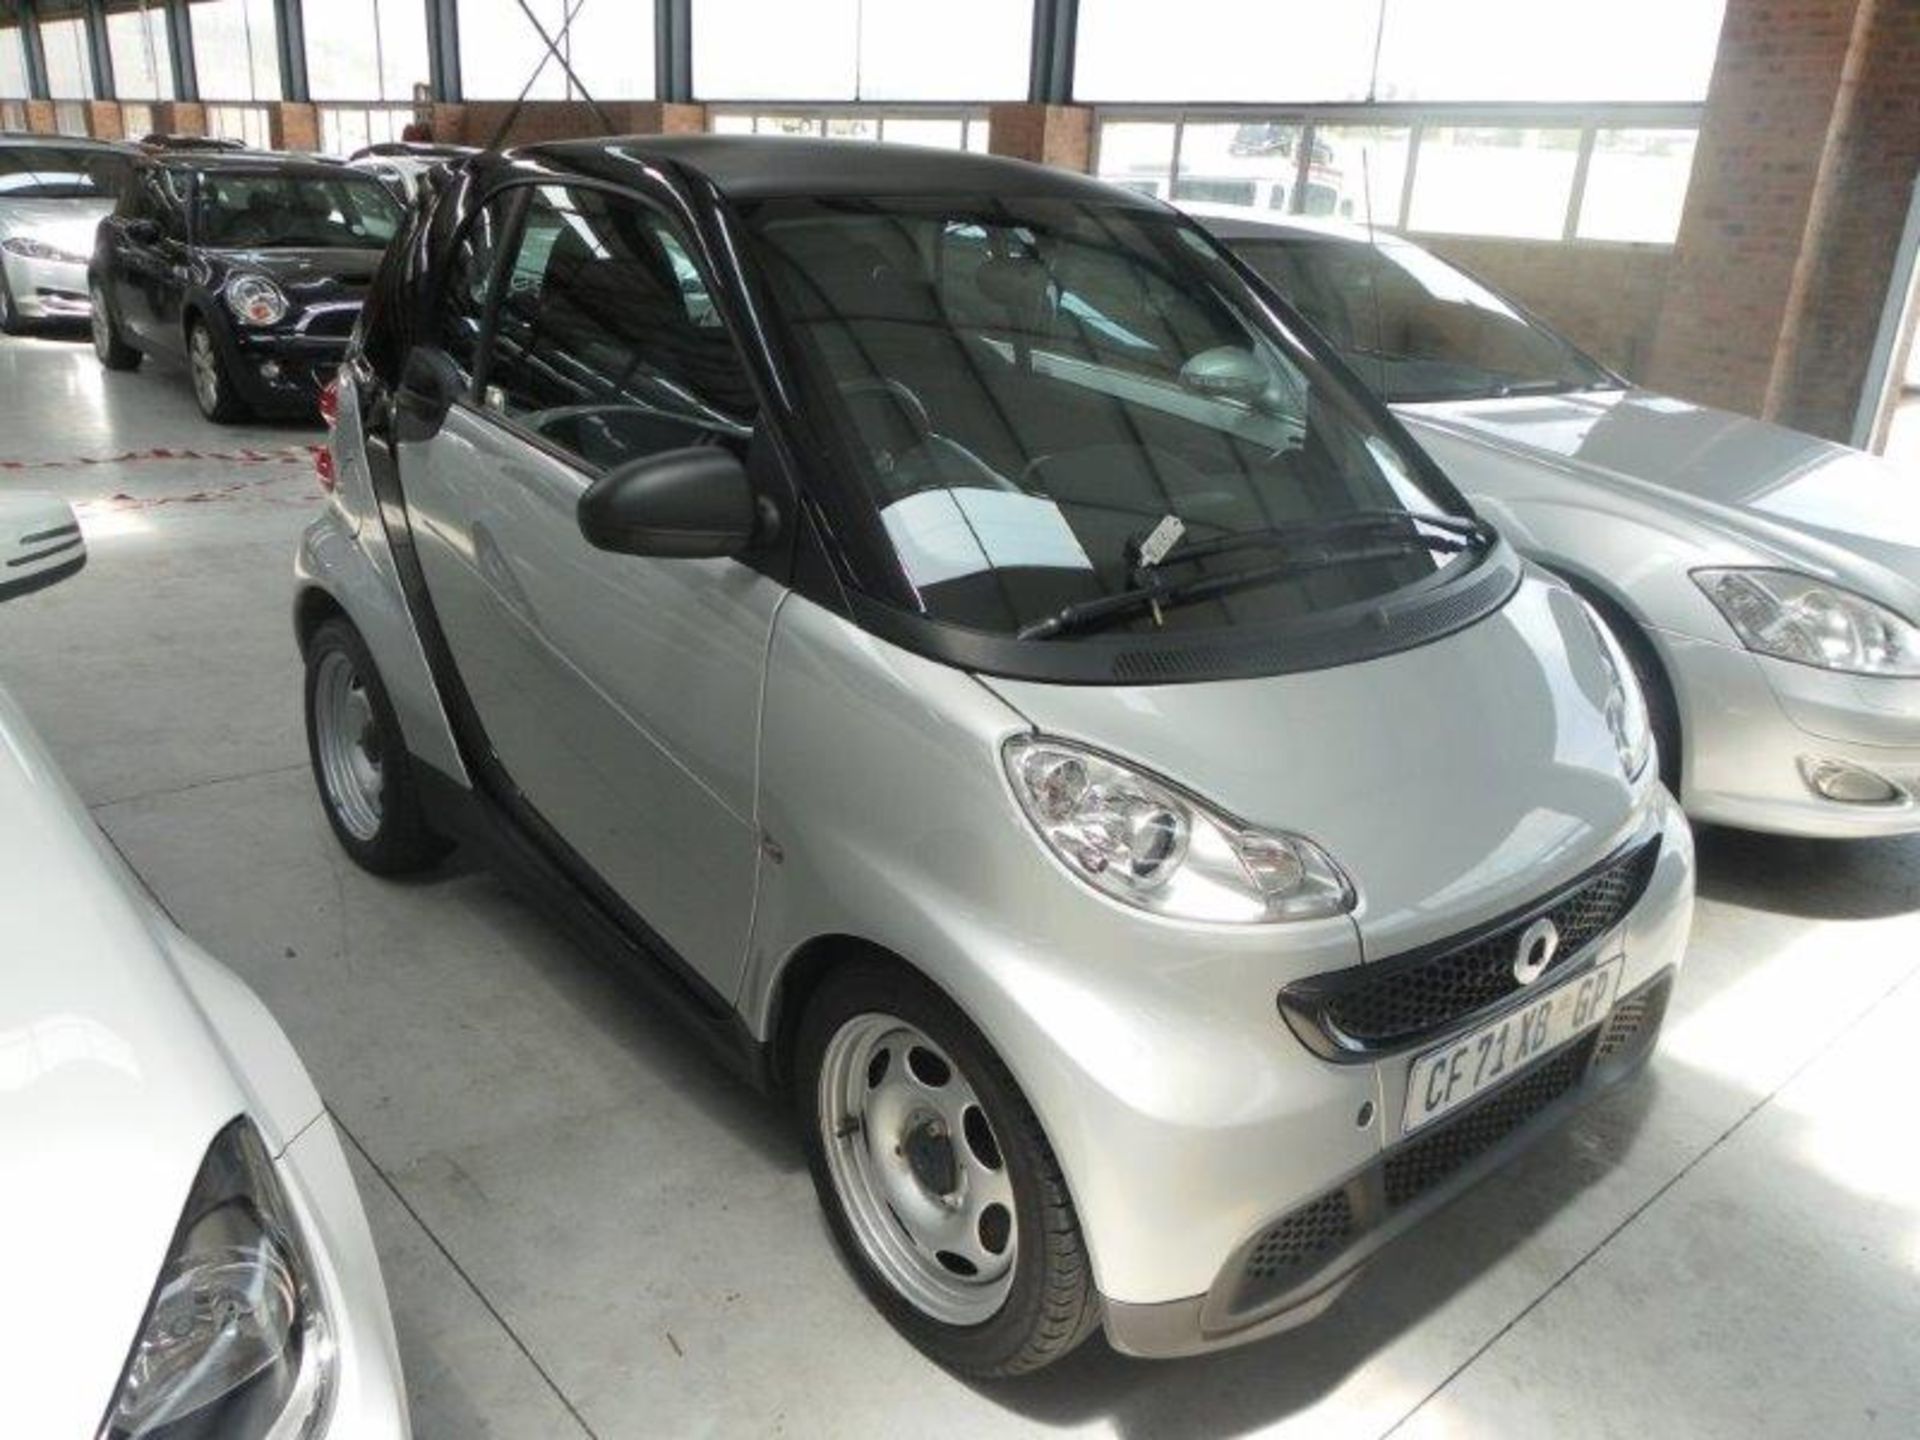 2012 CF71XBGP Smart For Two MHD Coupe Auto (Vin No: WME4513802K68304 )(47 515 kms)